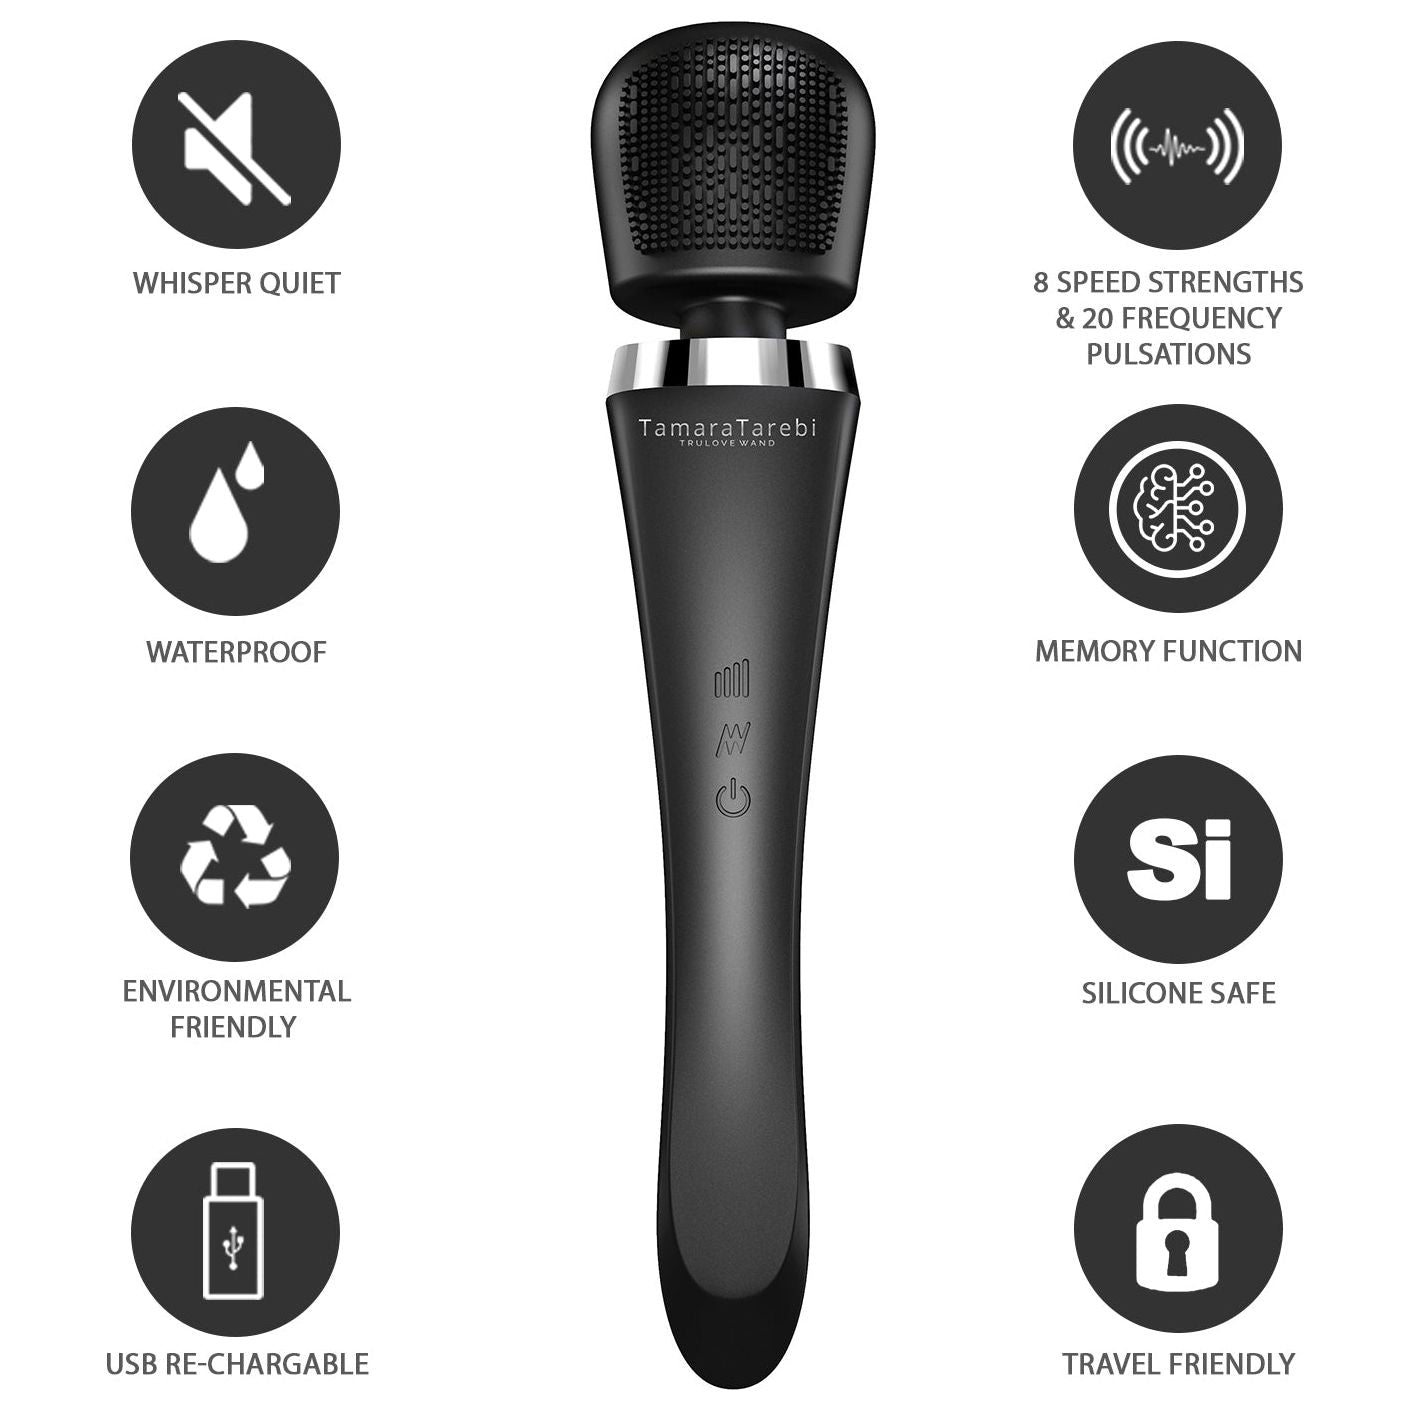 Indulge in Luxury: Premium Portable Therapeutic Body Massage Wand - Rechargeable - Black